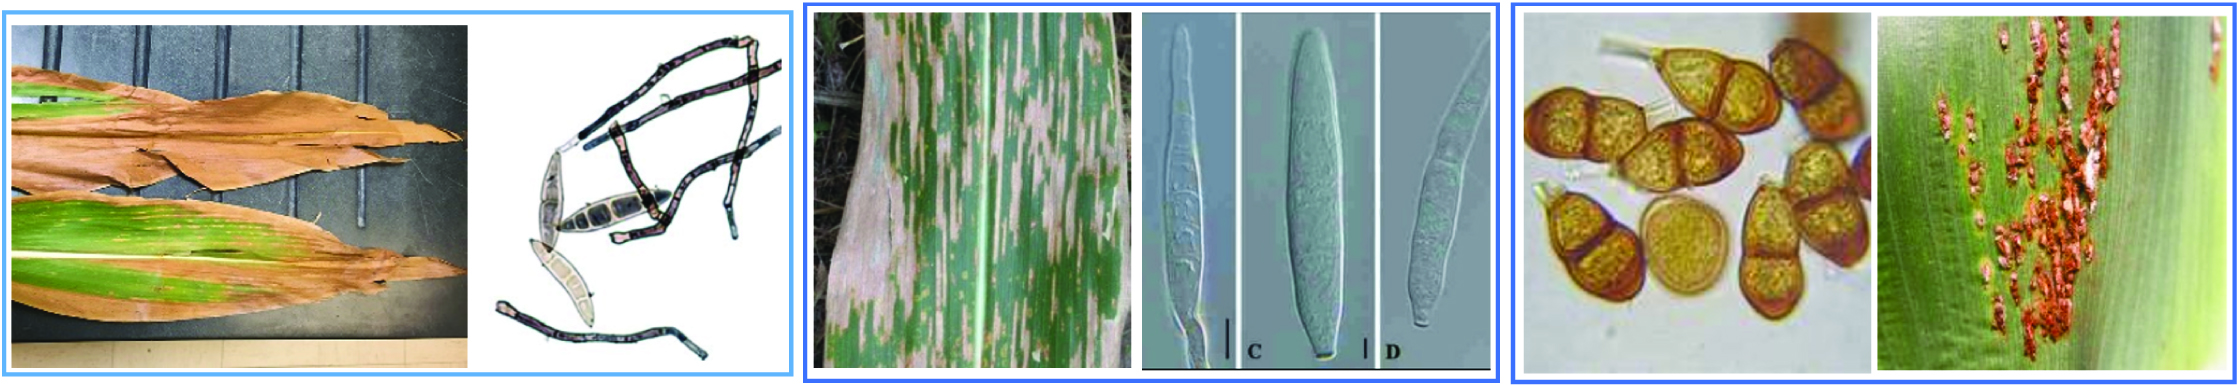 Sample images of Zea mays infected leaves and the microscopic view of their fungi